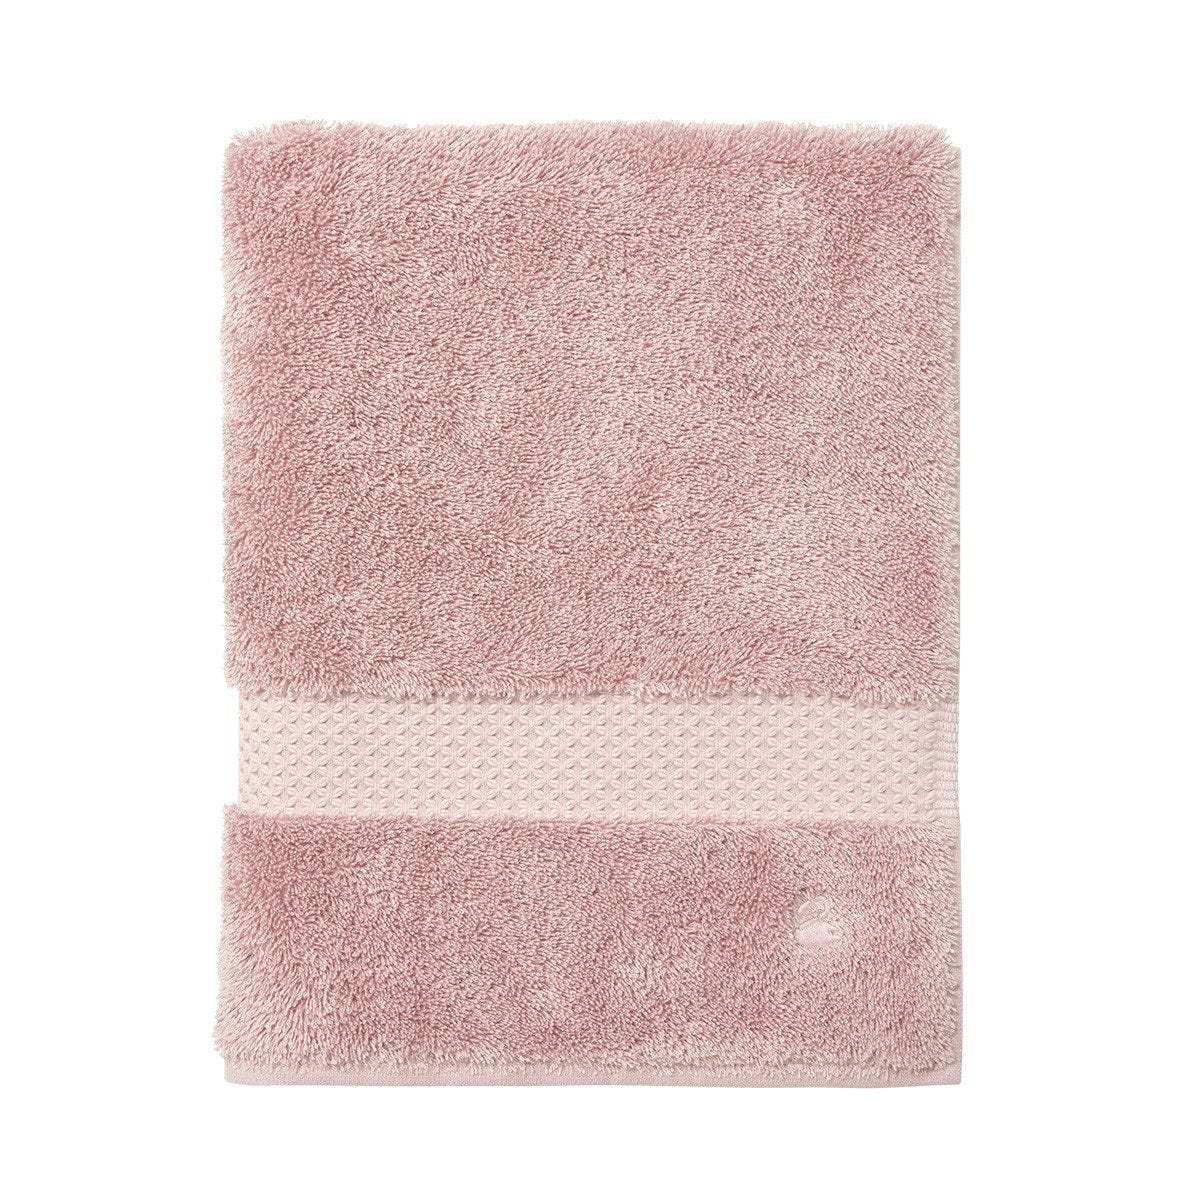 Bath Towels & Washcloths Etoile Towels by Yves Delorme Yves Delorme